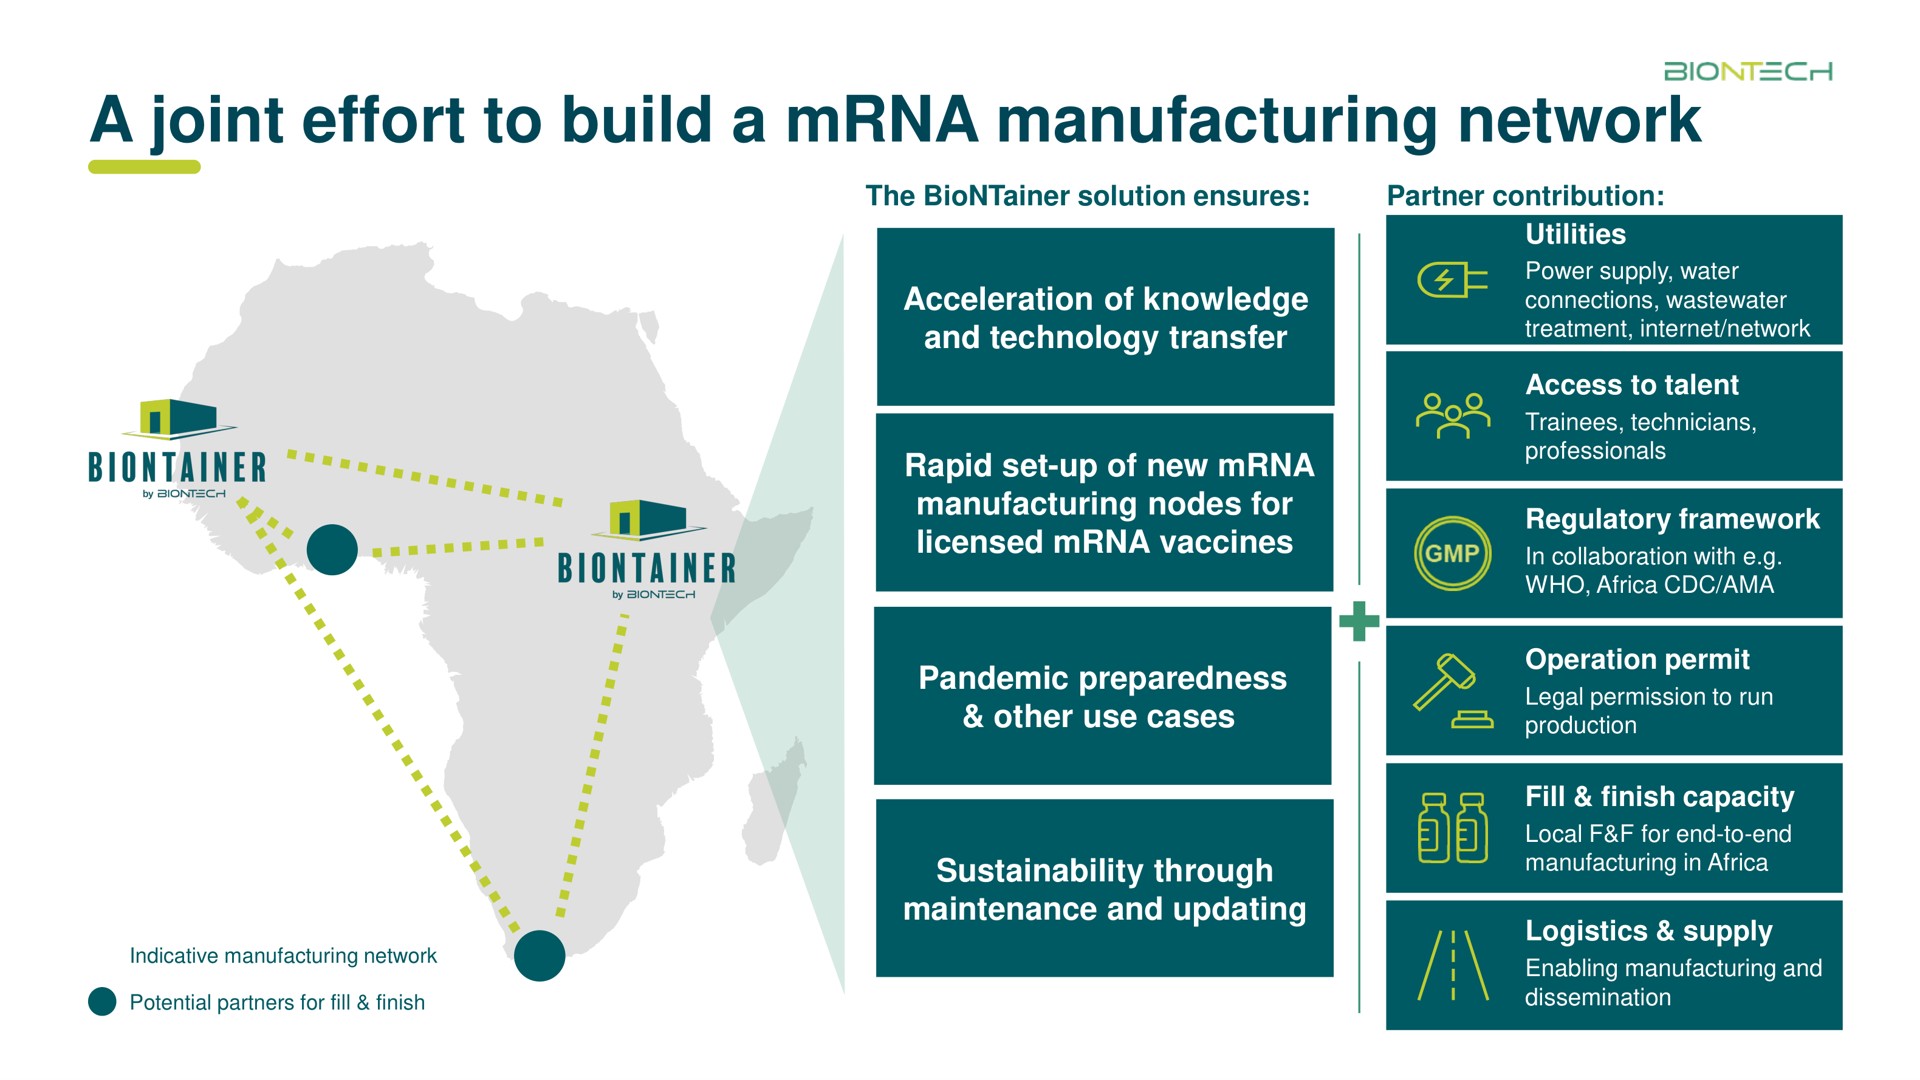 a joint effort to build a manufacturing network | BioNTech